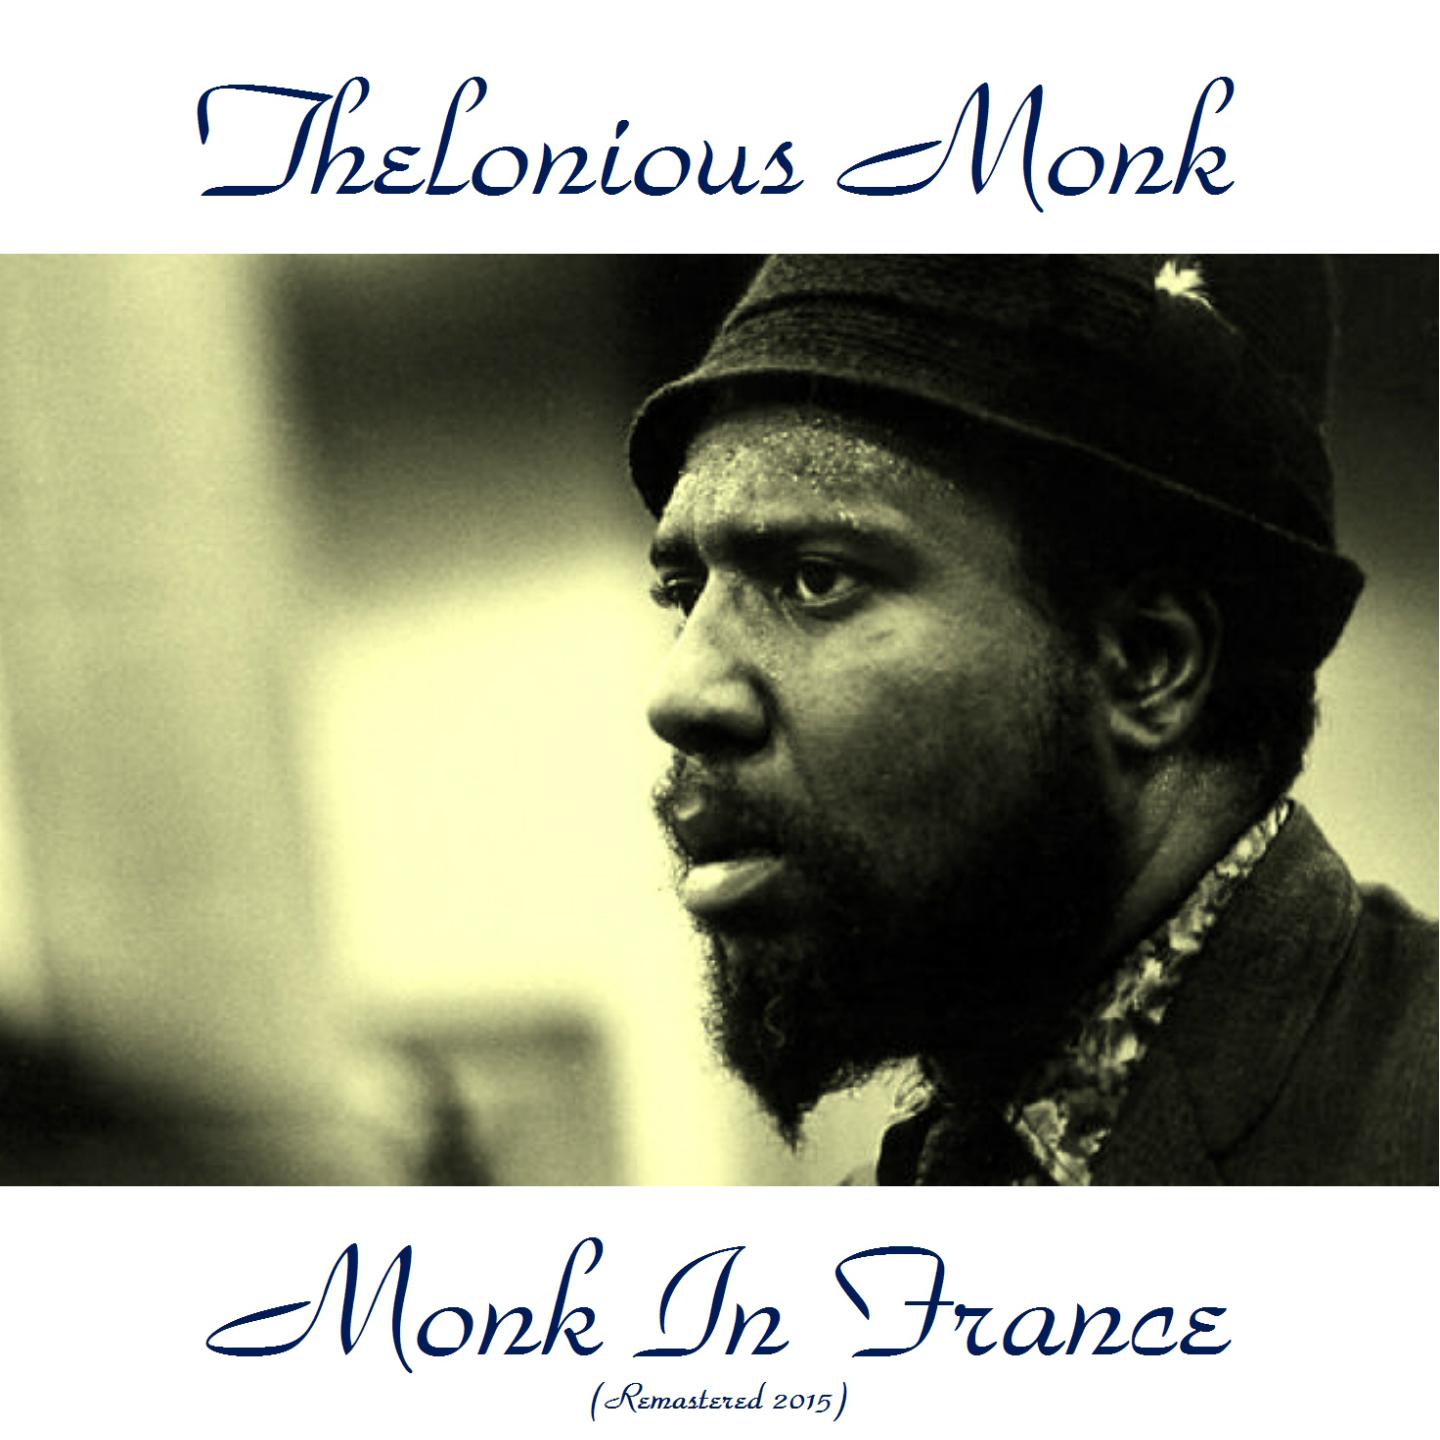 Monk in France (Remastered 2015)专辑